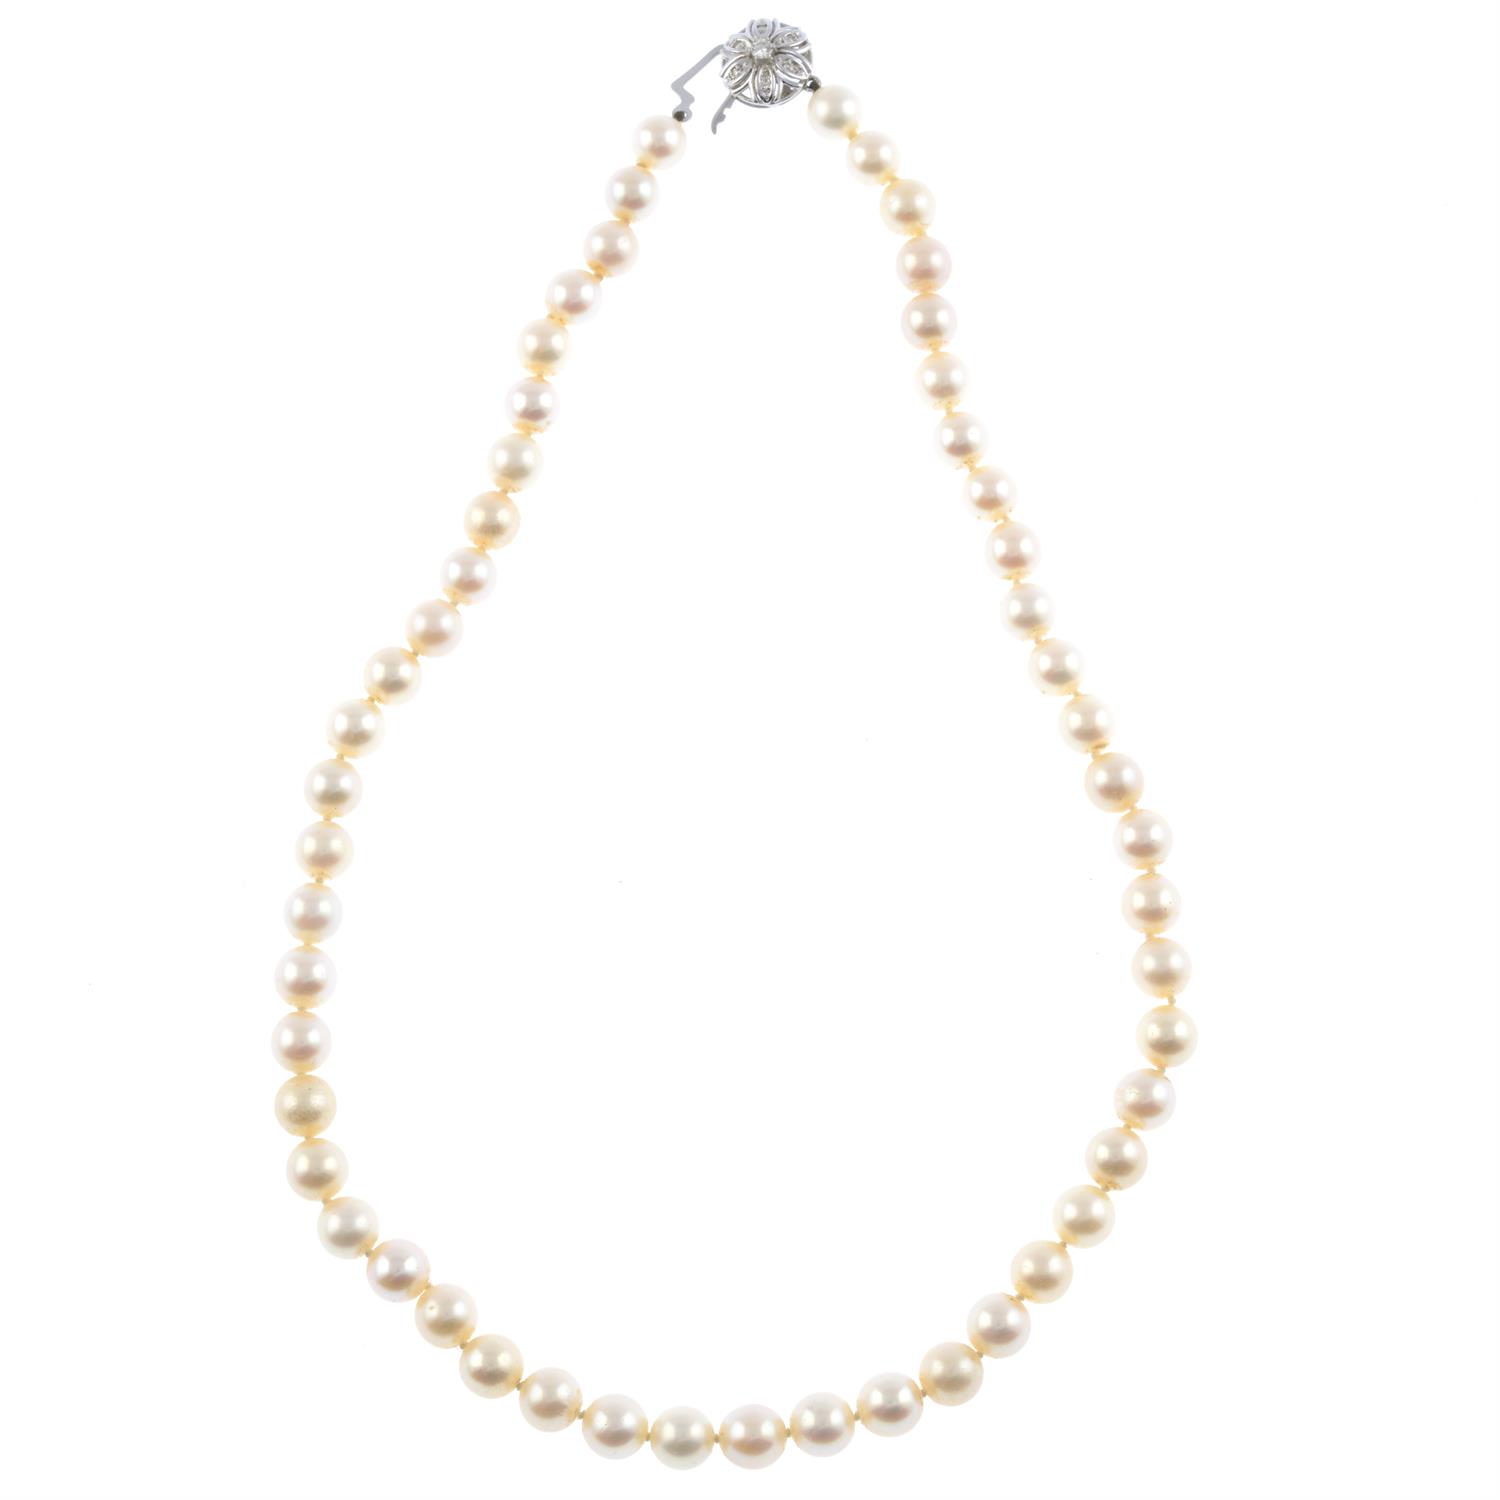 Cultured pearl single-strand necklace, with diamond accent clasp - Image 2 of 3